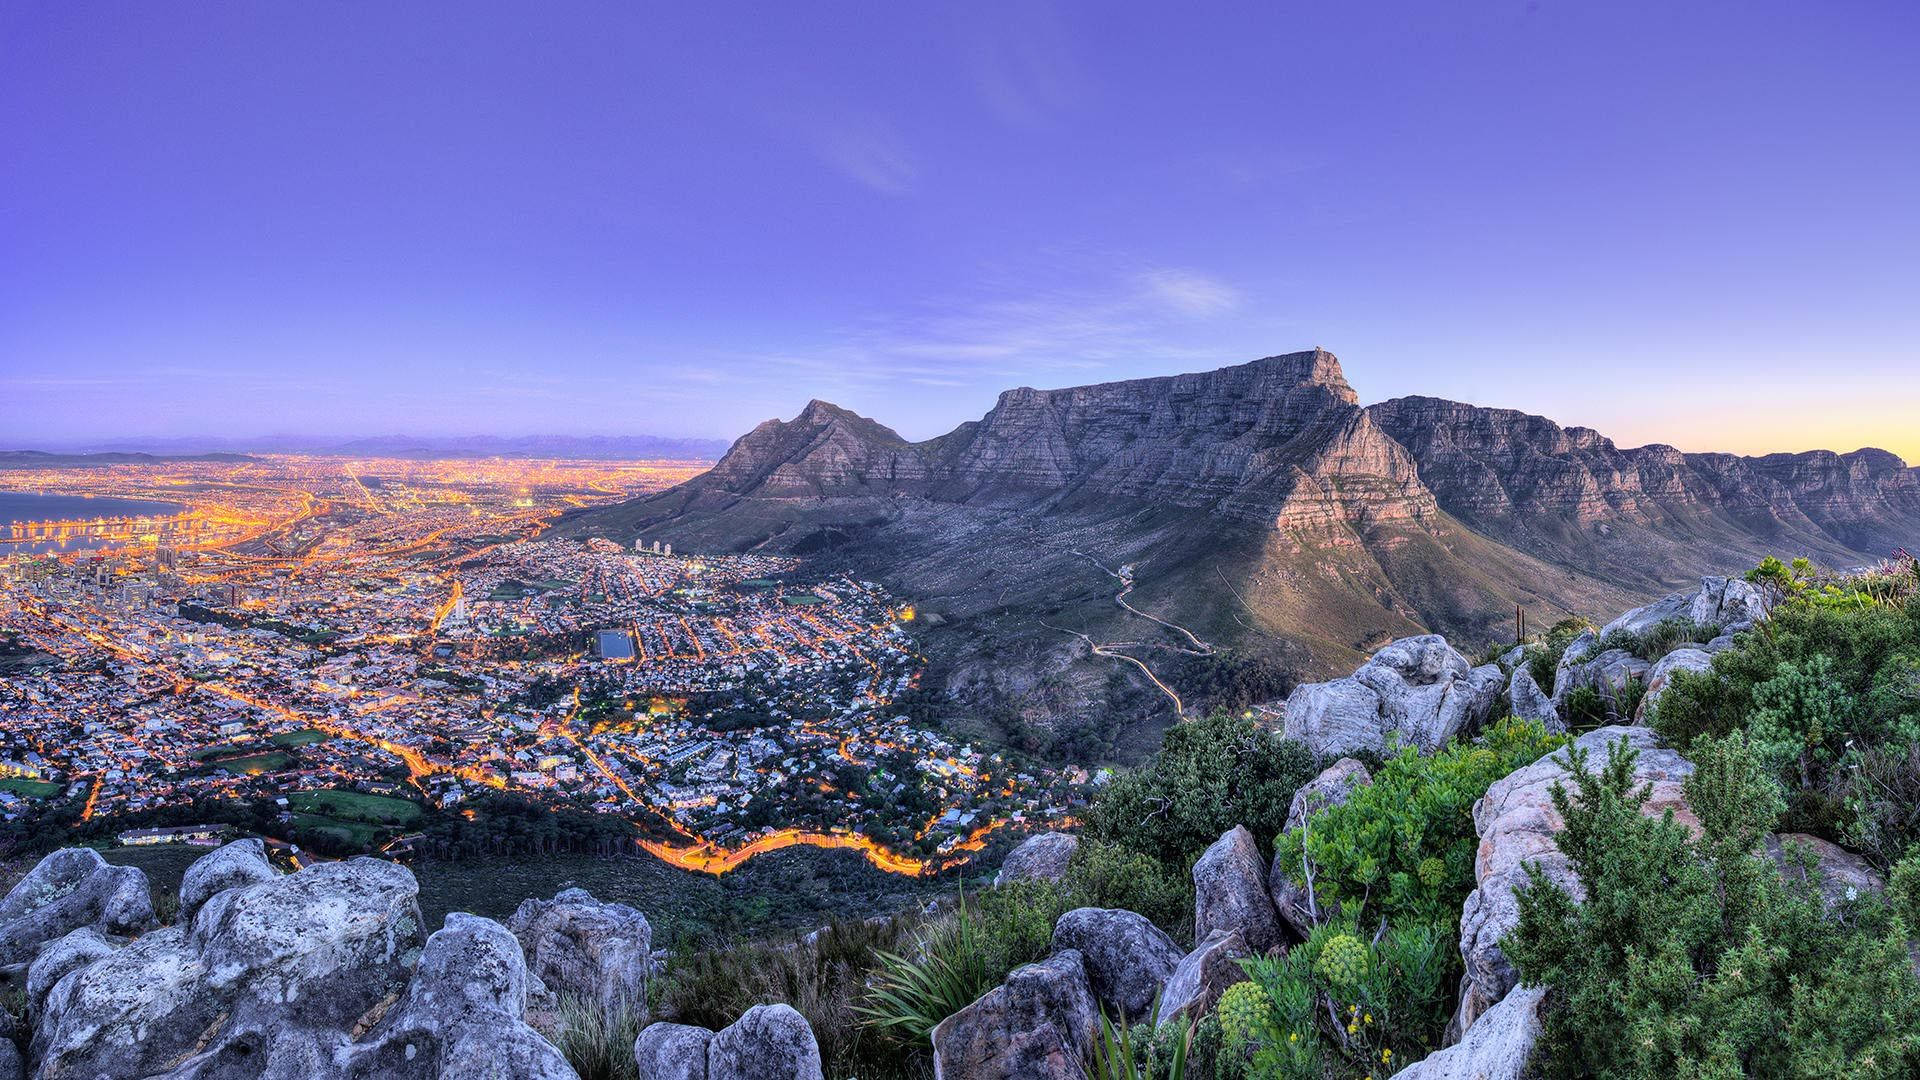 Lion's Head Landmark In South Africa Background